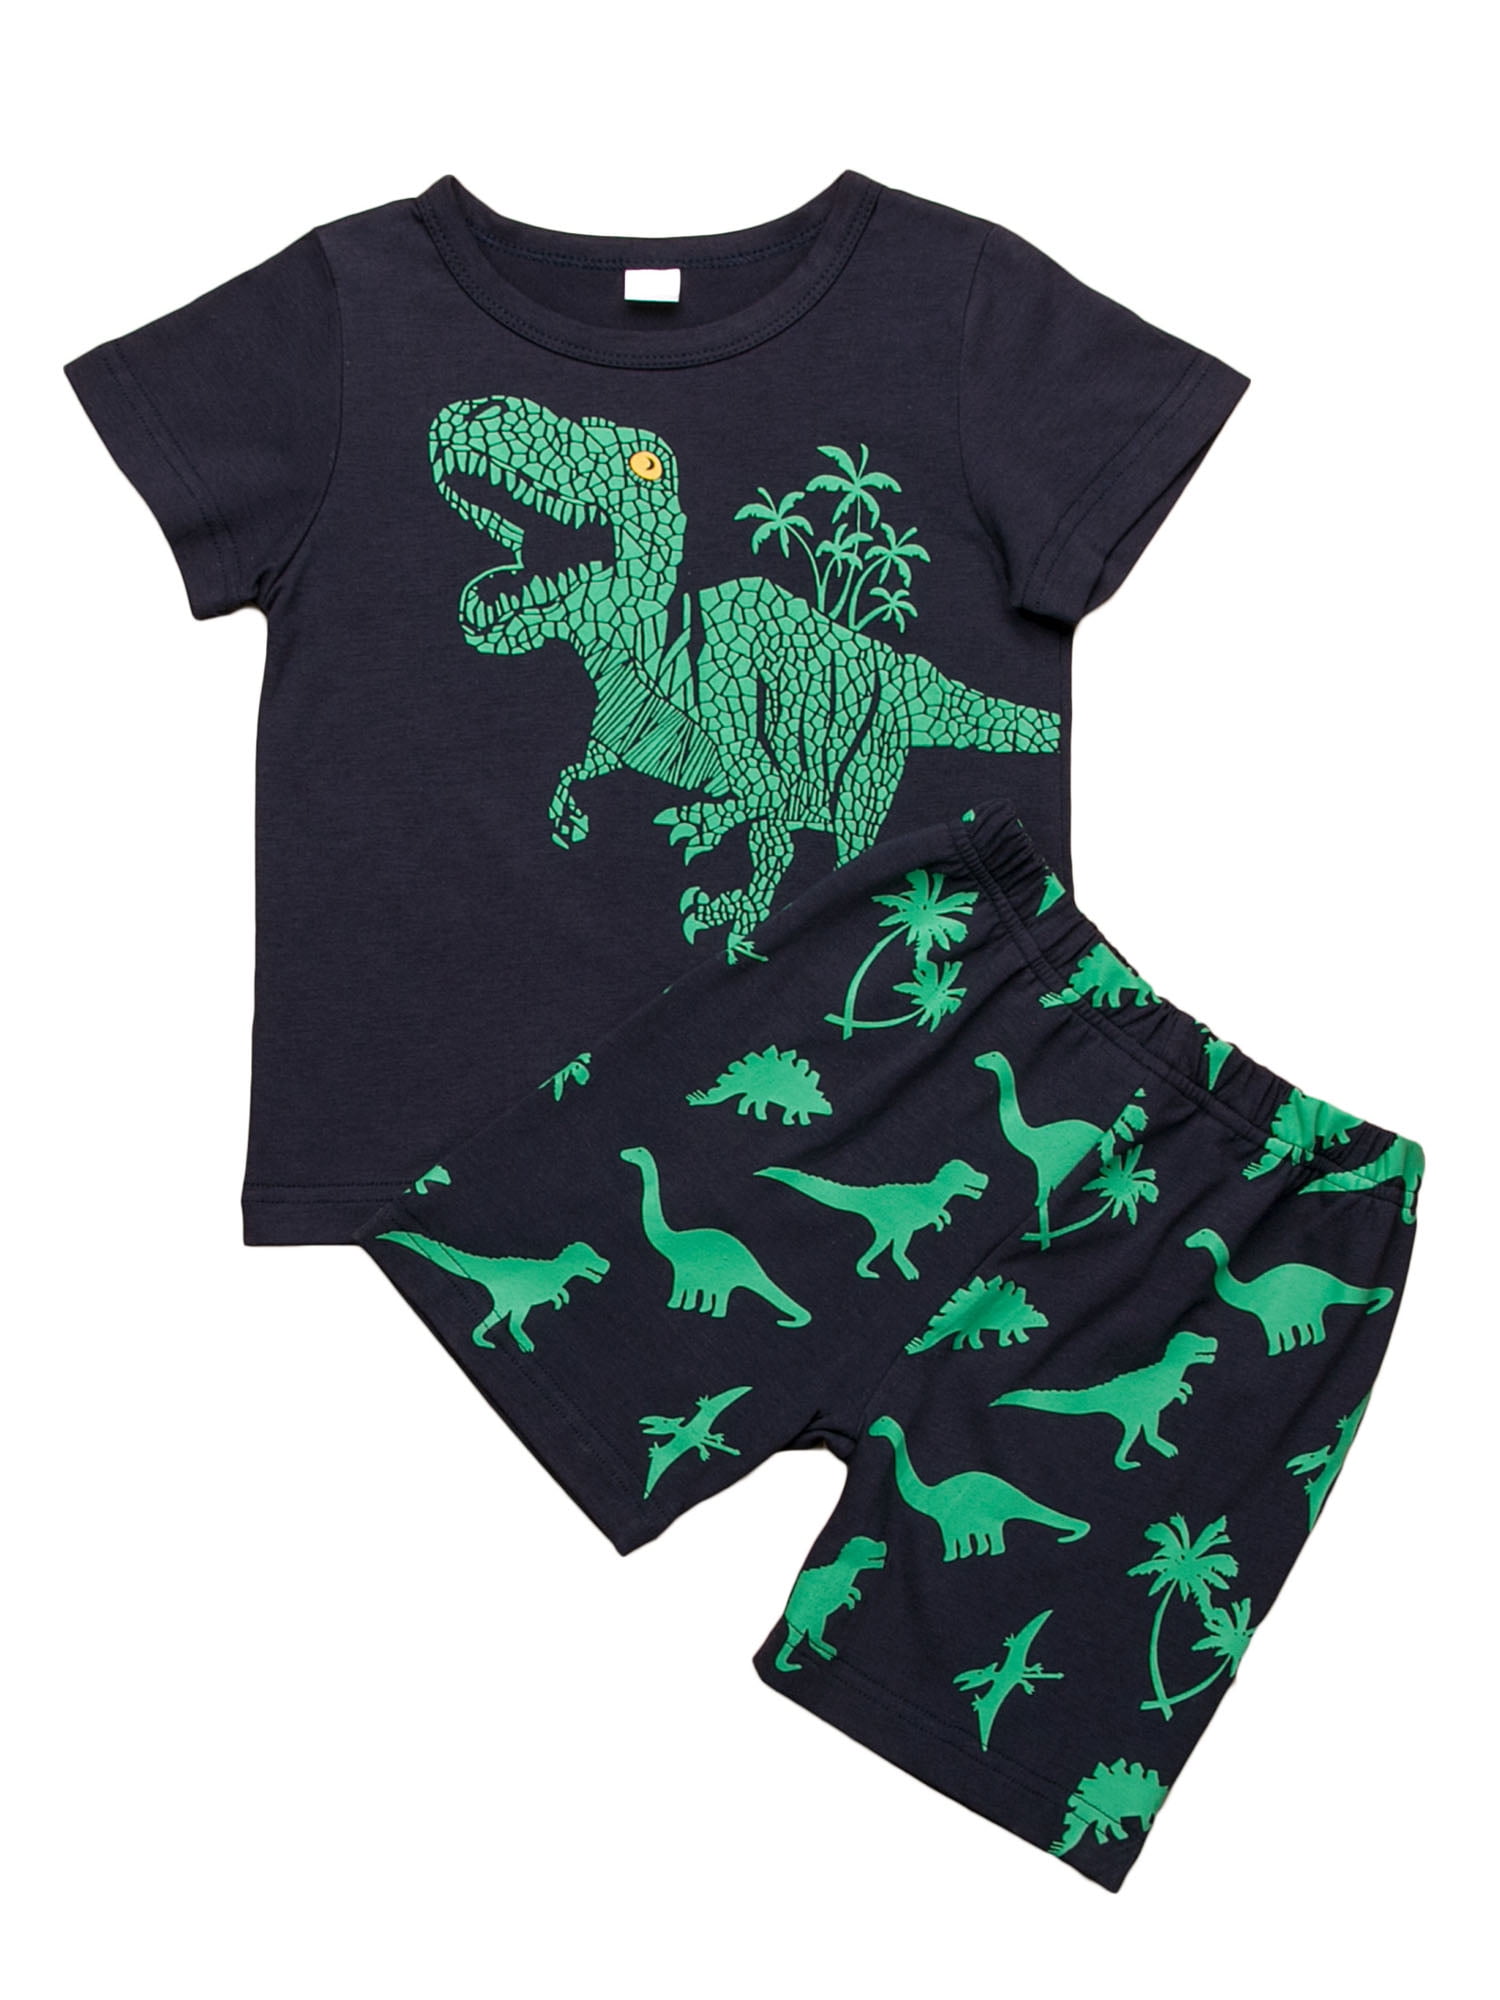 Angebebe 3PCS Baby Boy Outfit Set Baby Brother Dinosaur Tops Pant Romper